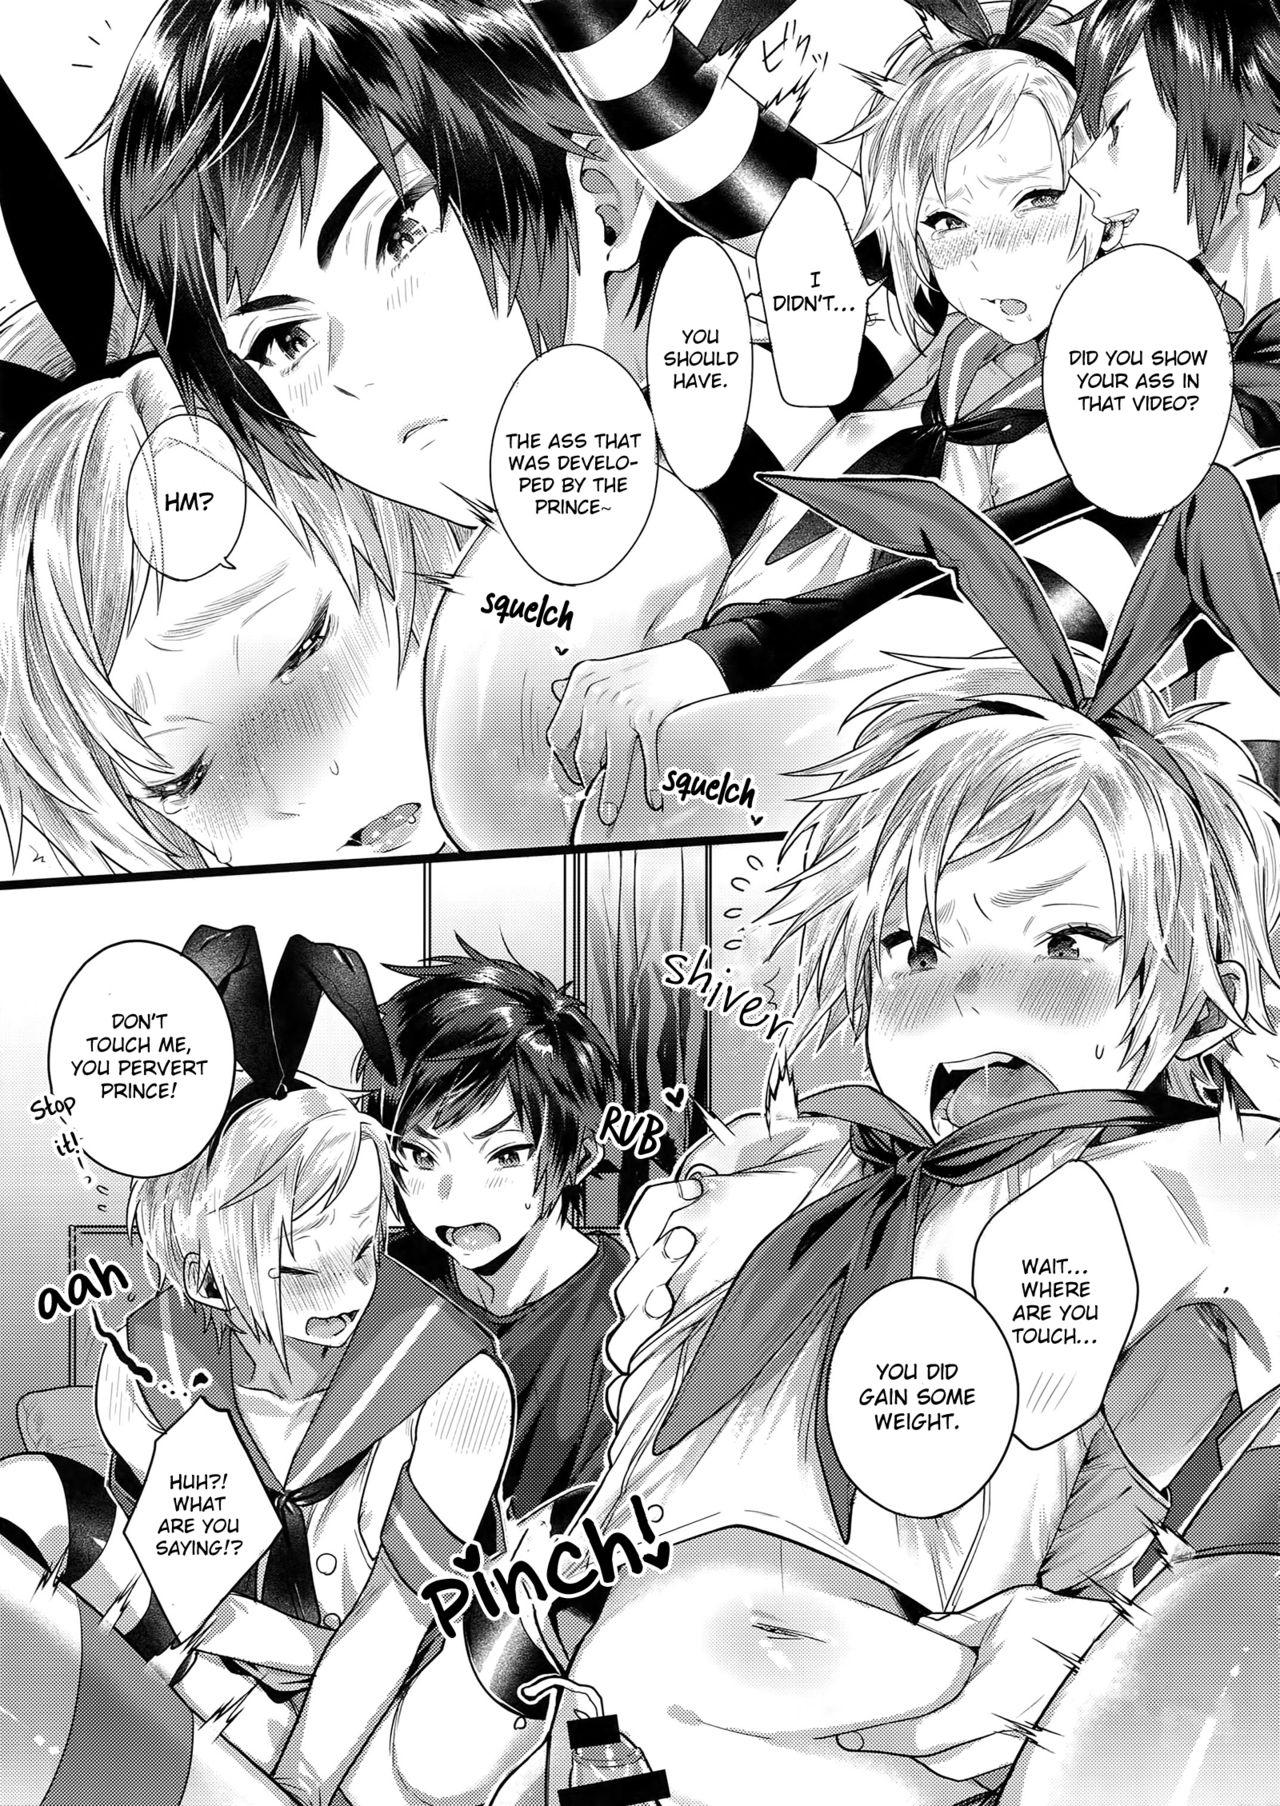 Bhabi Taikei Iji no Shudan | Prompto Argentum-kun's Means For Maintaining His Body Shape! - Kantai collection Final fantasy xv Pinoy - Page 8